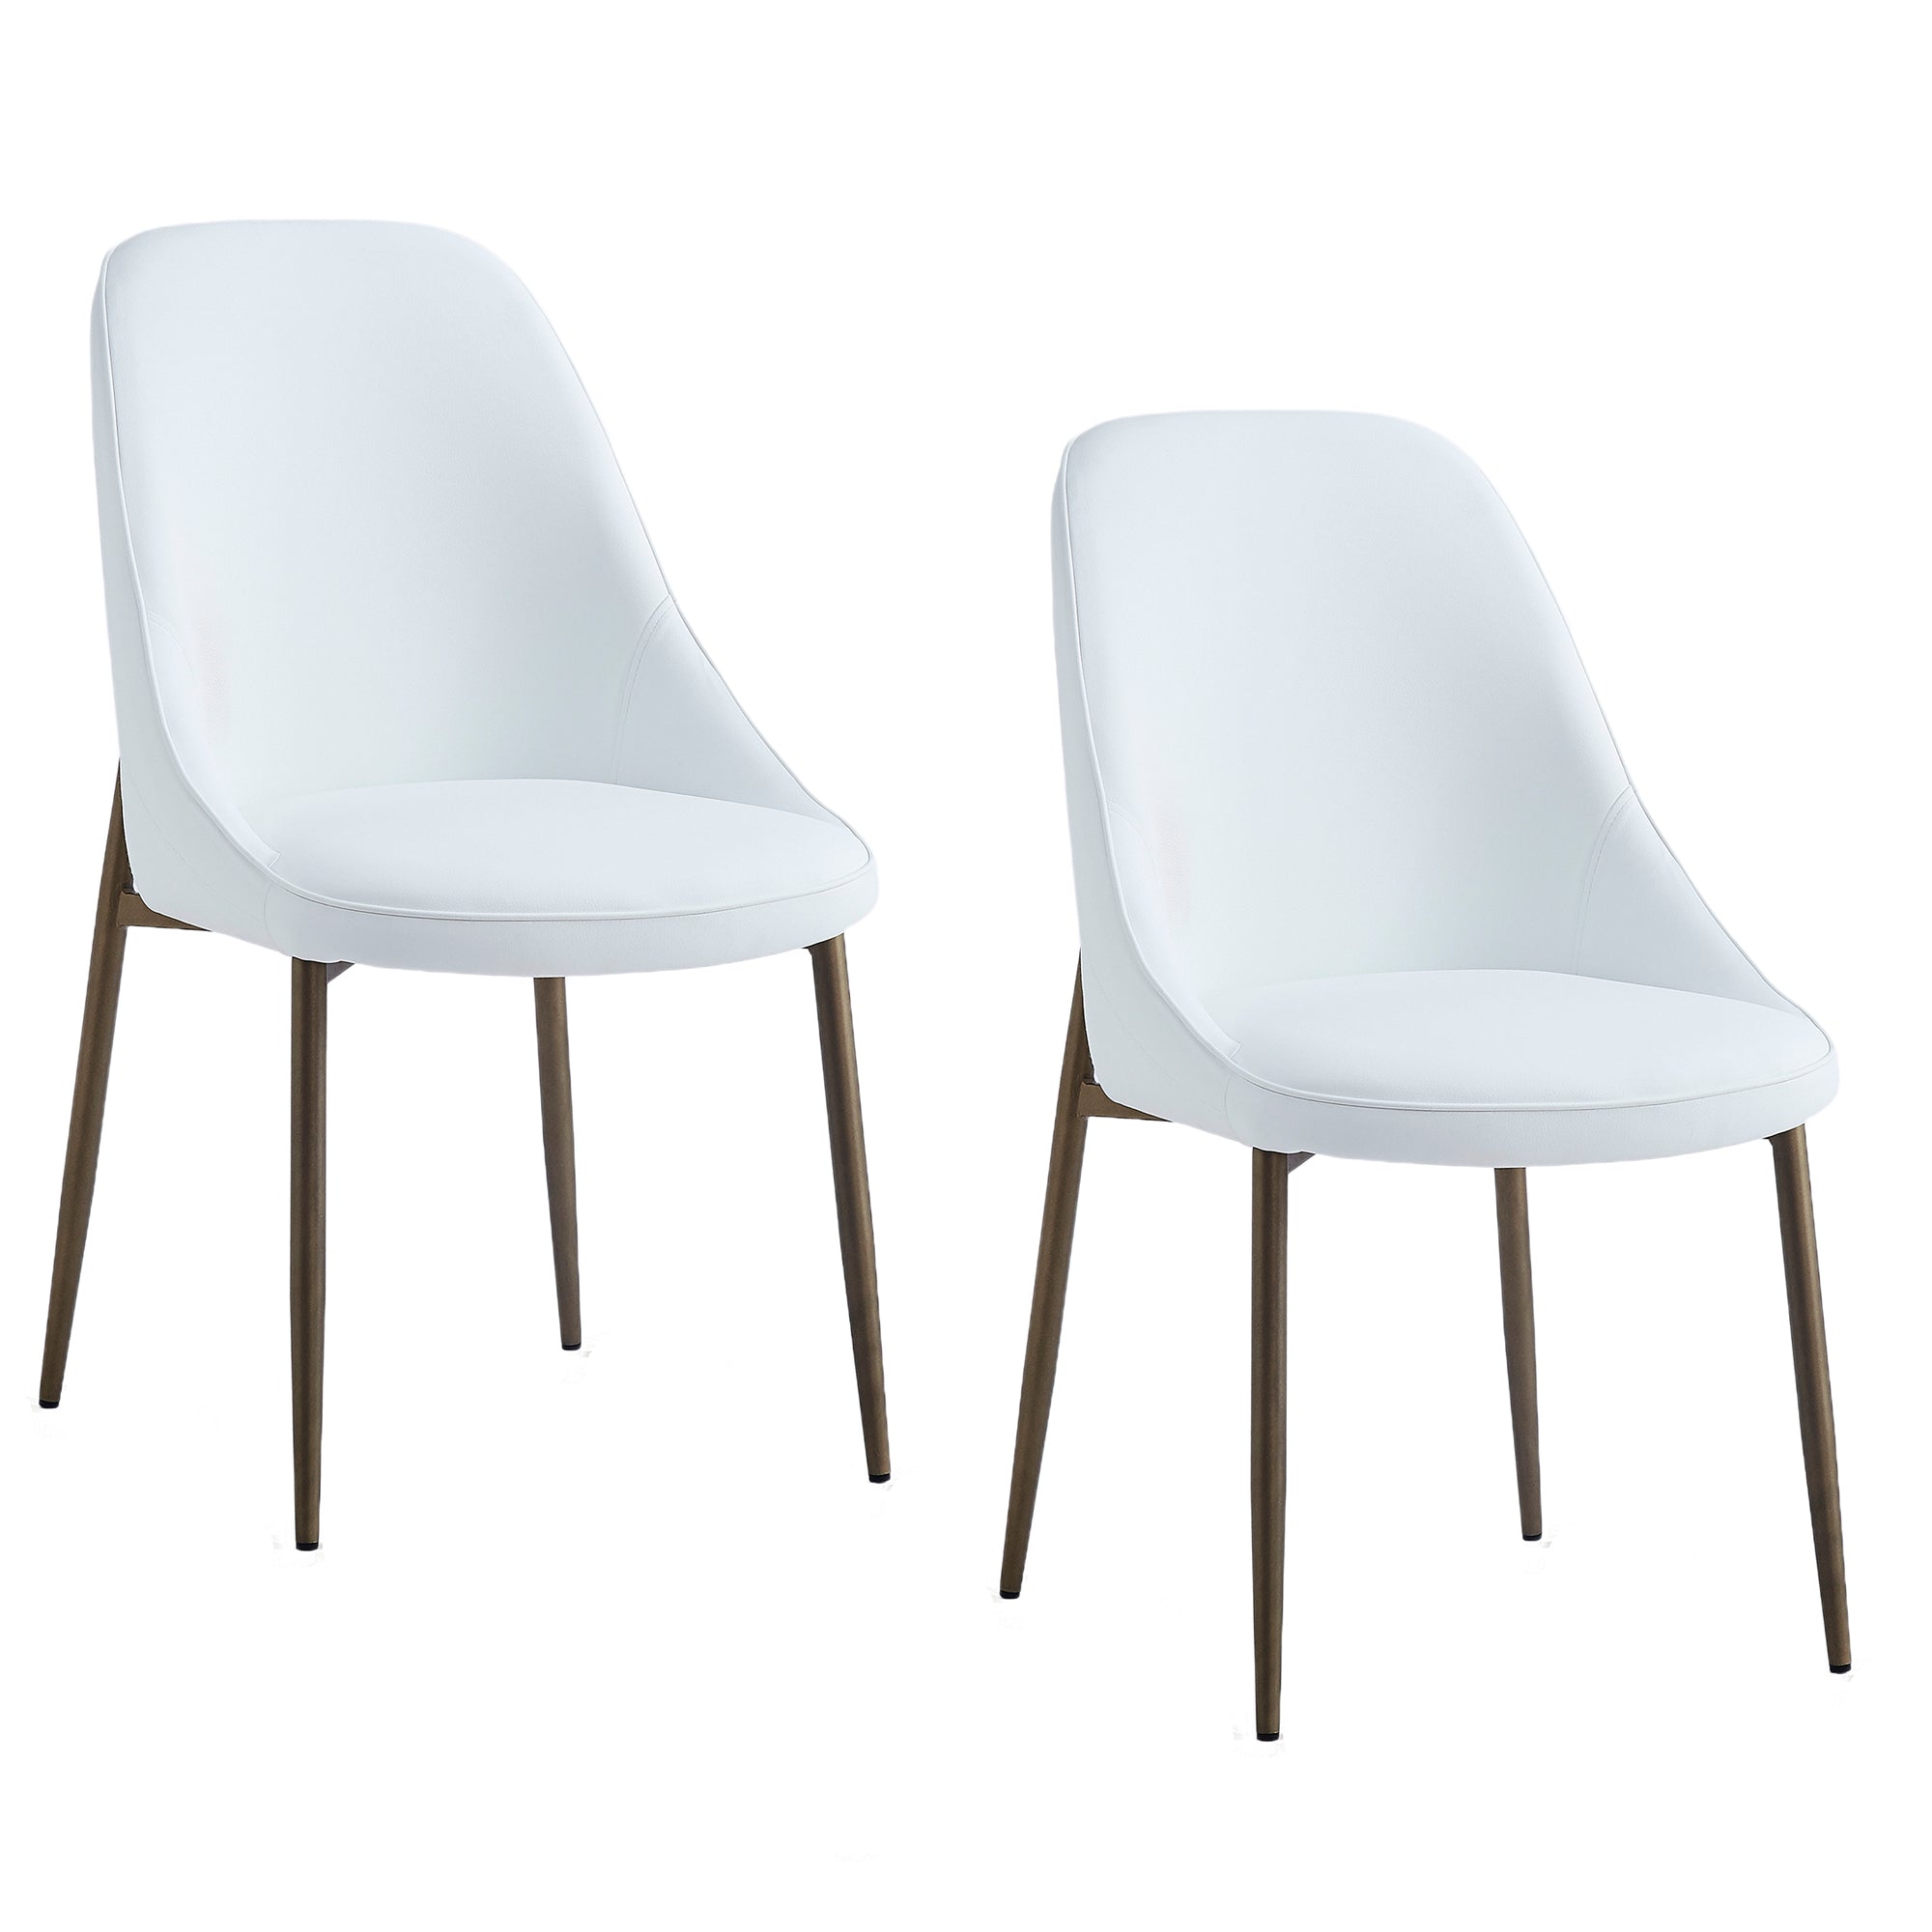 Cleo Side Chair, Set of 2, in White and Aged Gold 202-636WT